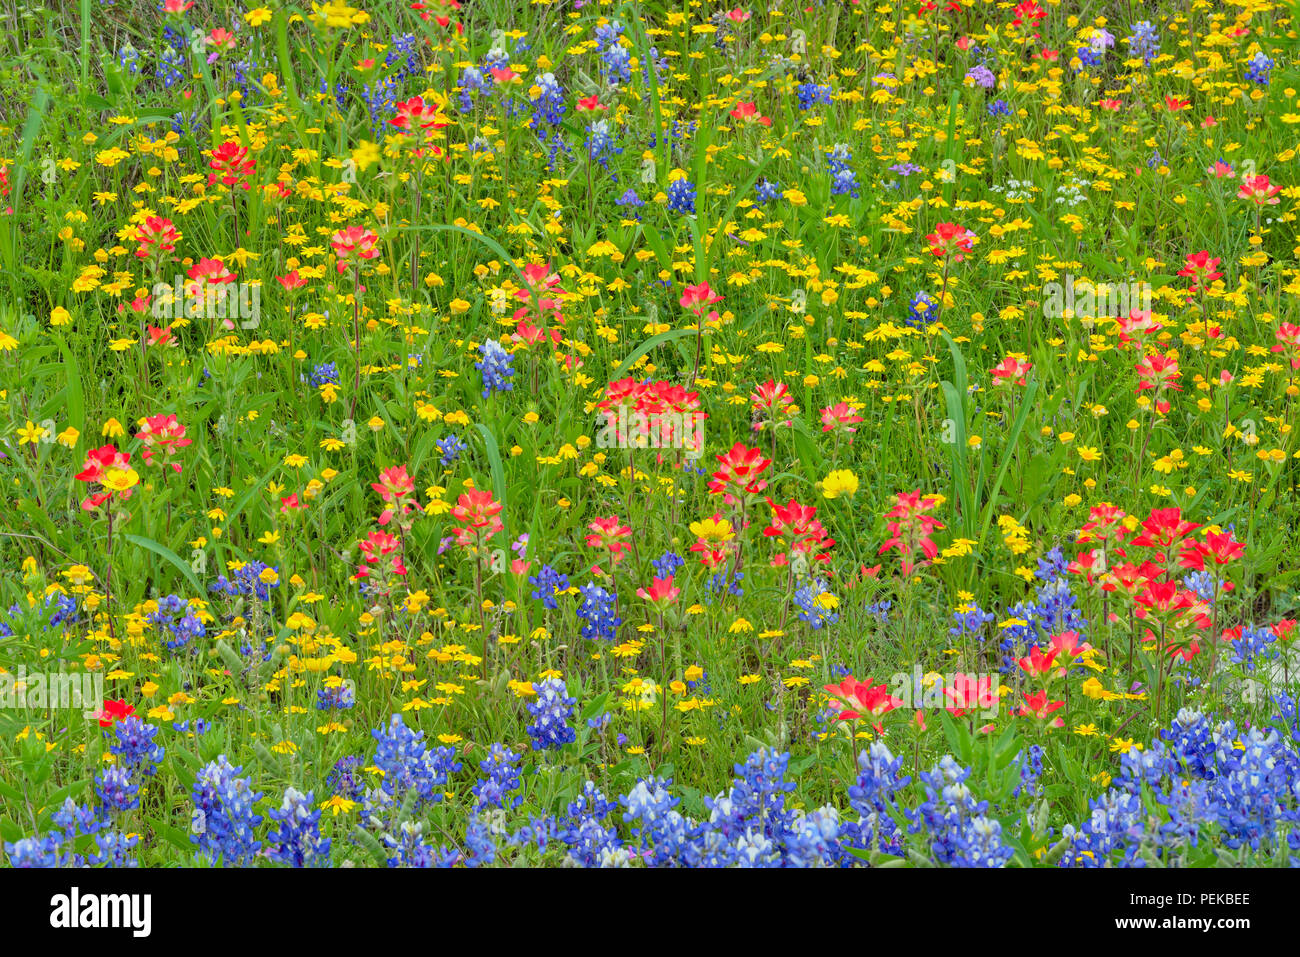 Roadside wildflowers in bloom- Texas paintbrush, bluebonnets and daisies, Burnet County, Texas, USA Stock Photo